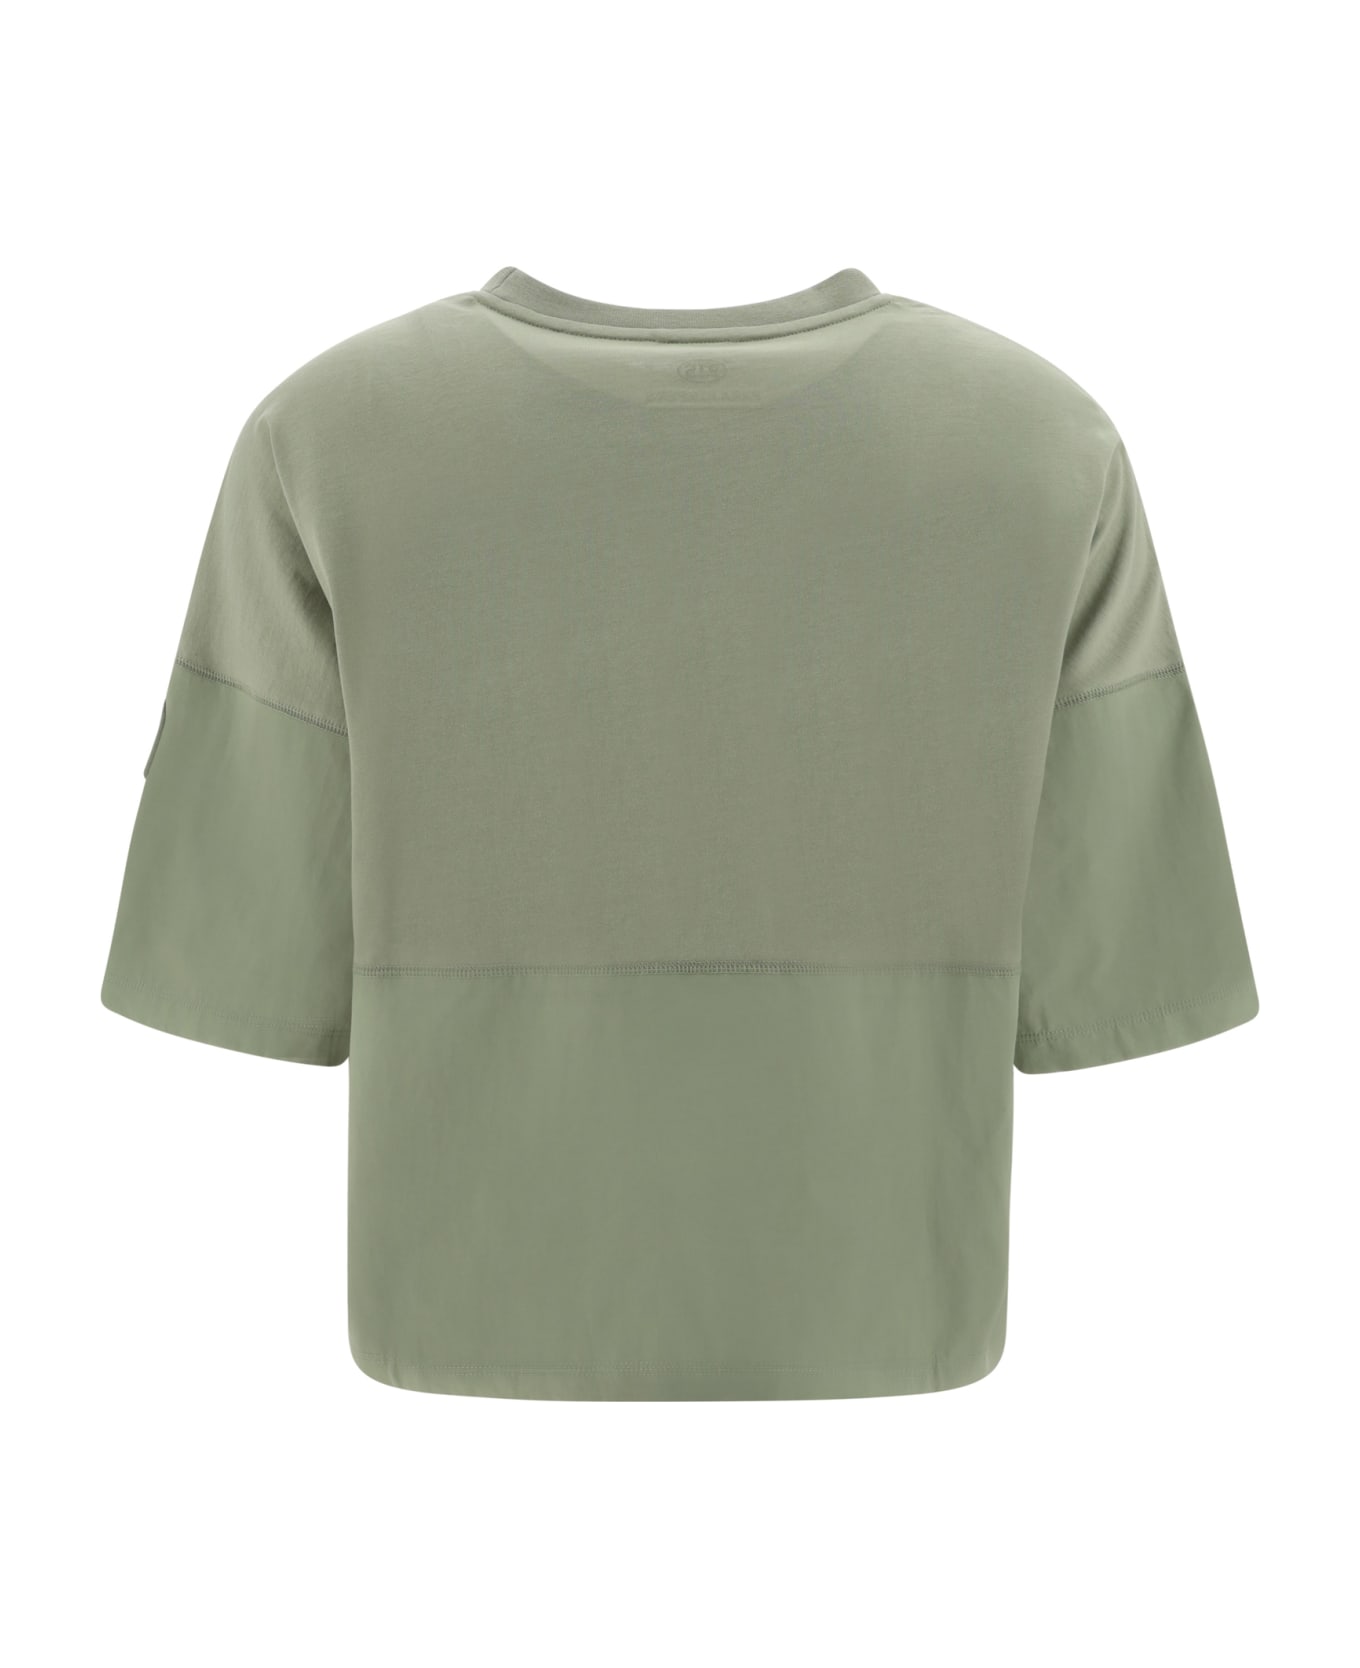 Parajumpers T-shirt - Sage Tシャツ